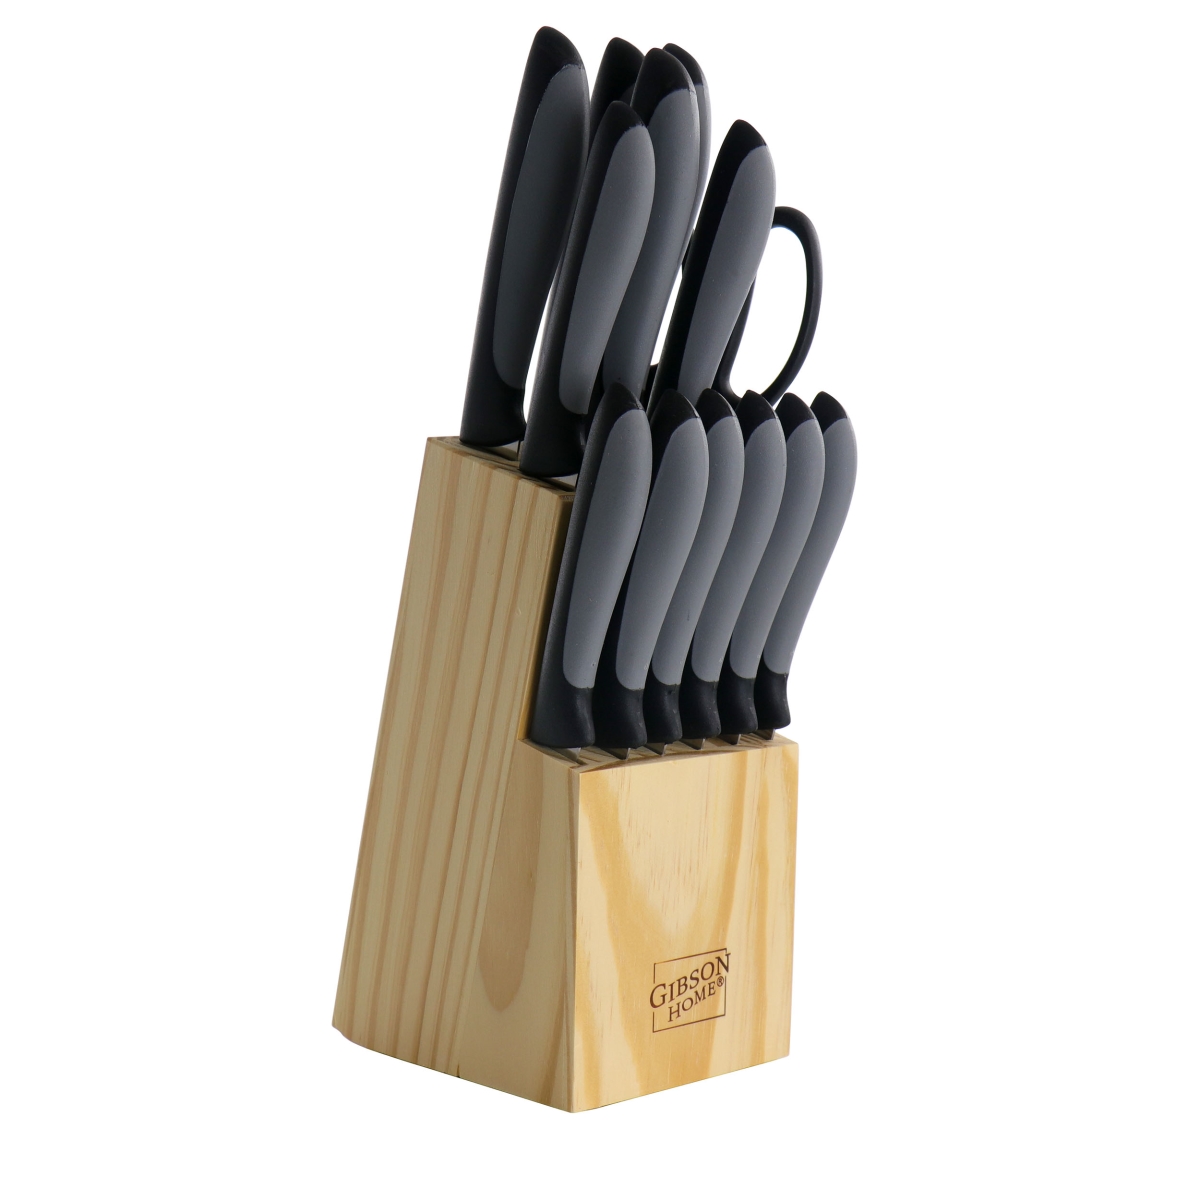 Picture of Gibson Home 127769.14 Dorain Stainless Steel Cutlery Set, Black with Wood Block - 14 Piece